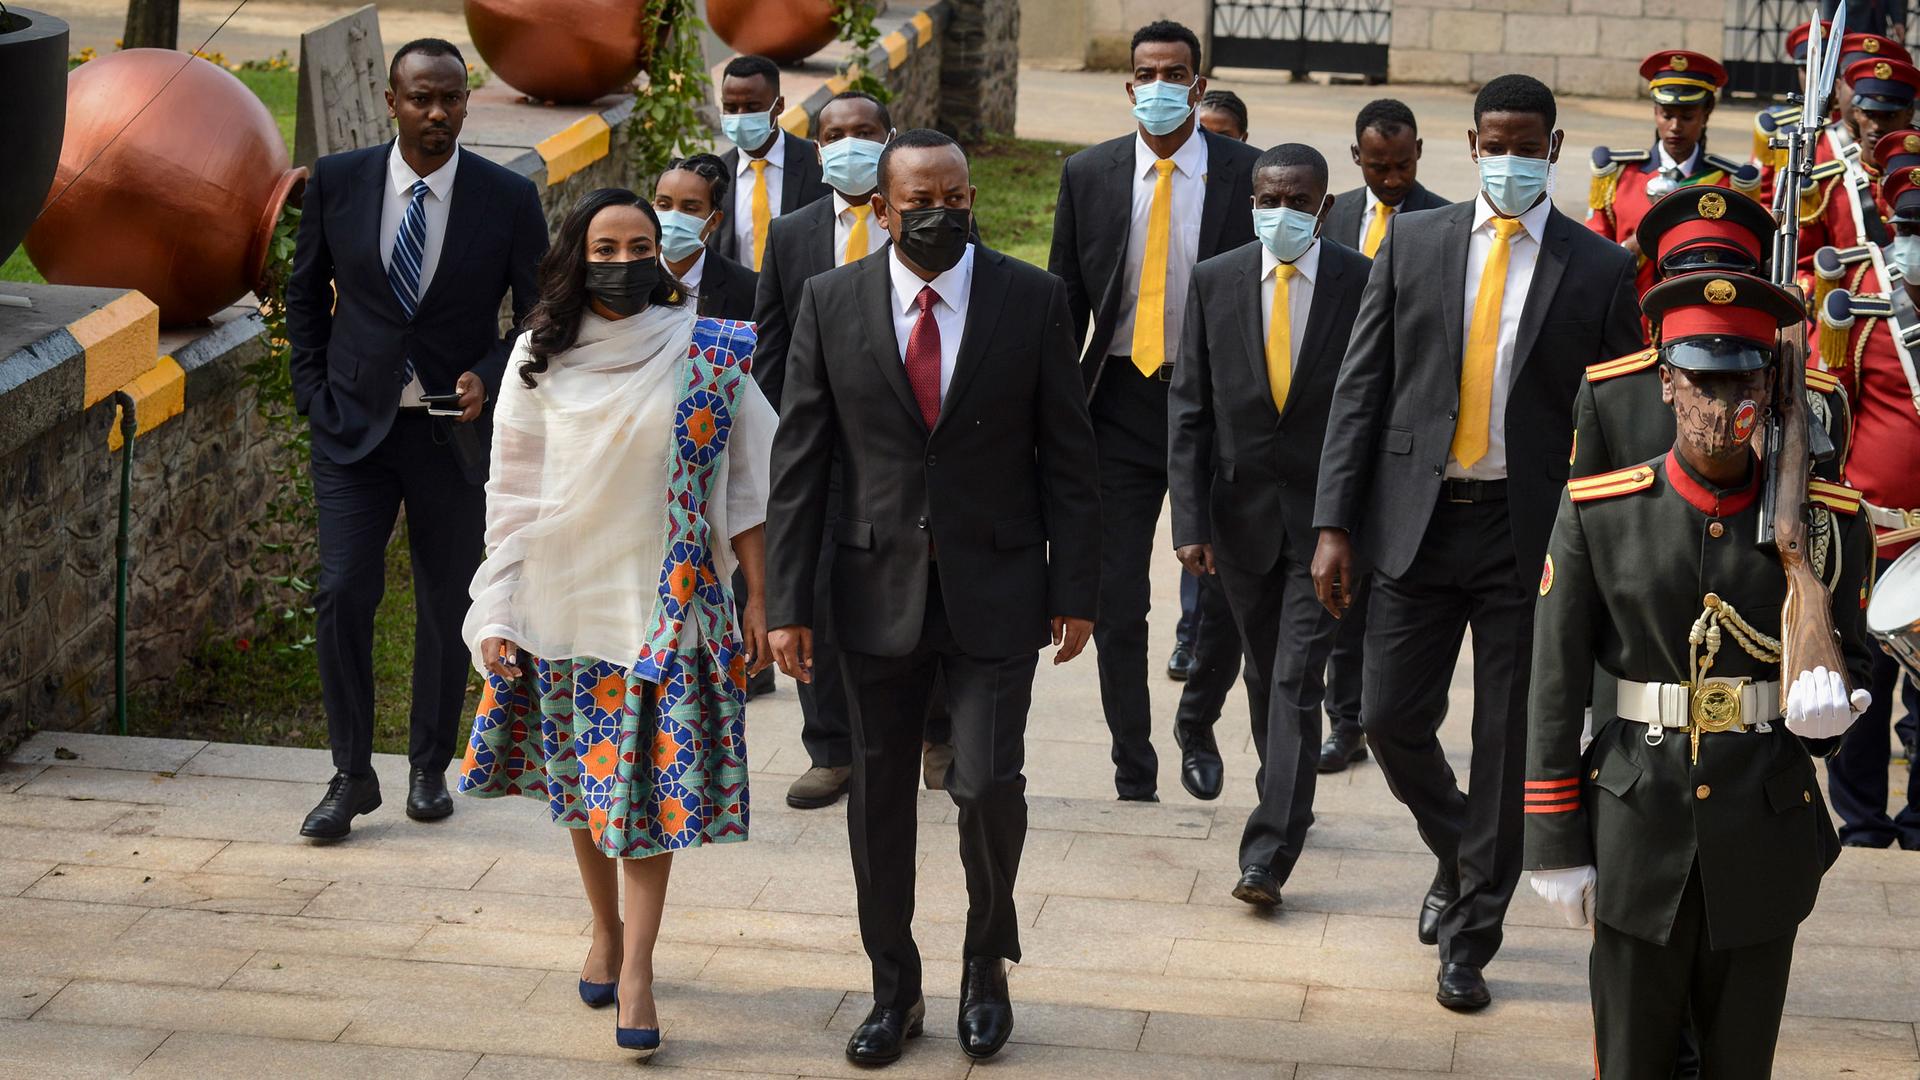 Ethiopia's Prime Minister Abiy Ahmed is shown wearing a suit a face mask while walking next to First Lady Zinash Tayachew who is wearing a white and flower print dress.